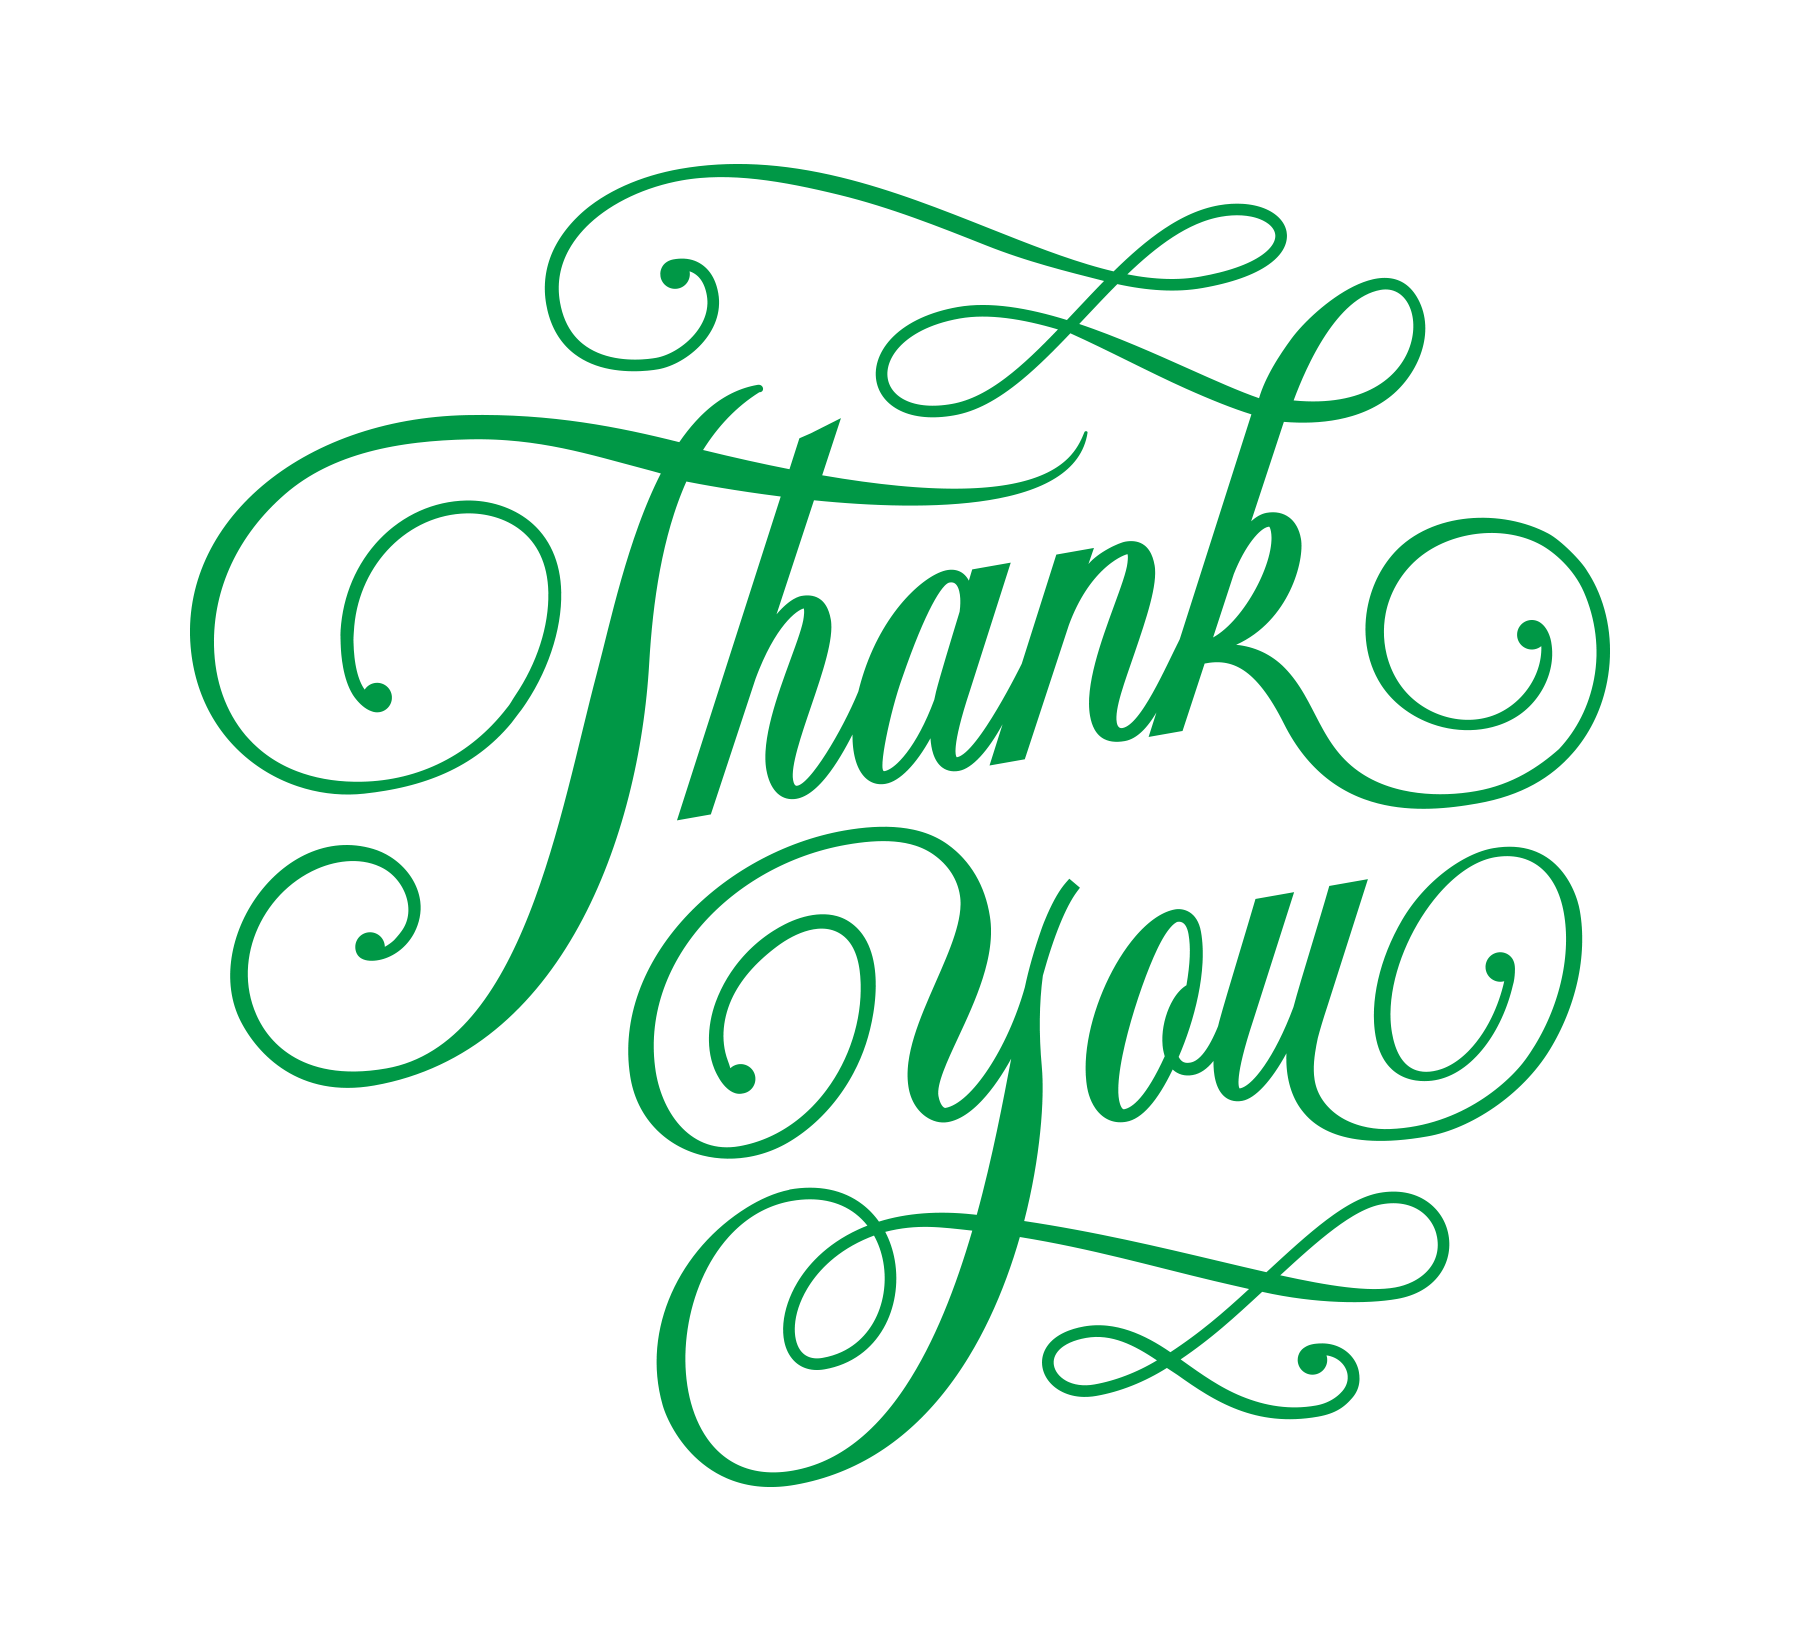 Thank You Cards Leo Gomez Studio Hand Lettering Hand Painted Signs And Murals St Pete Fl